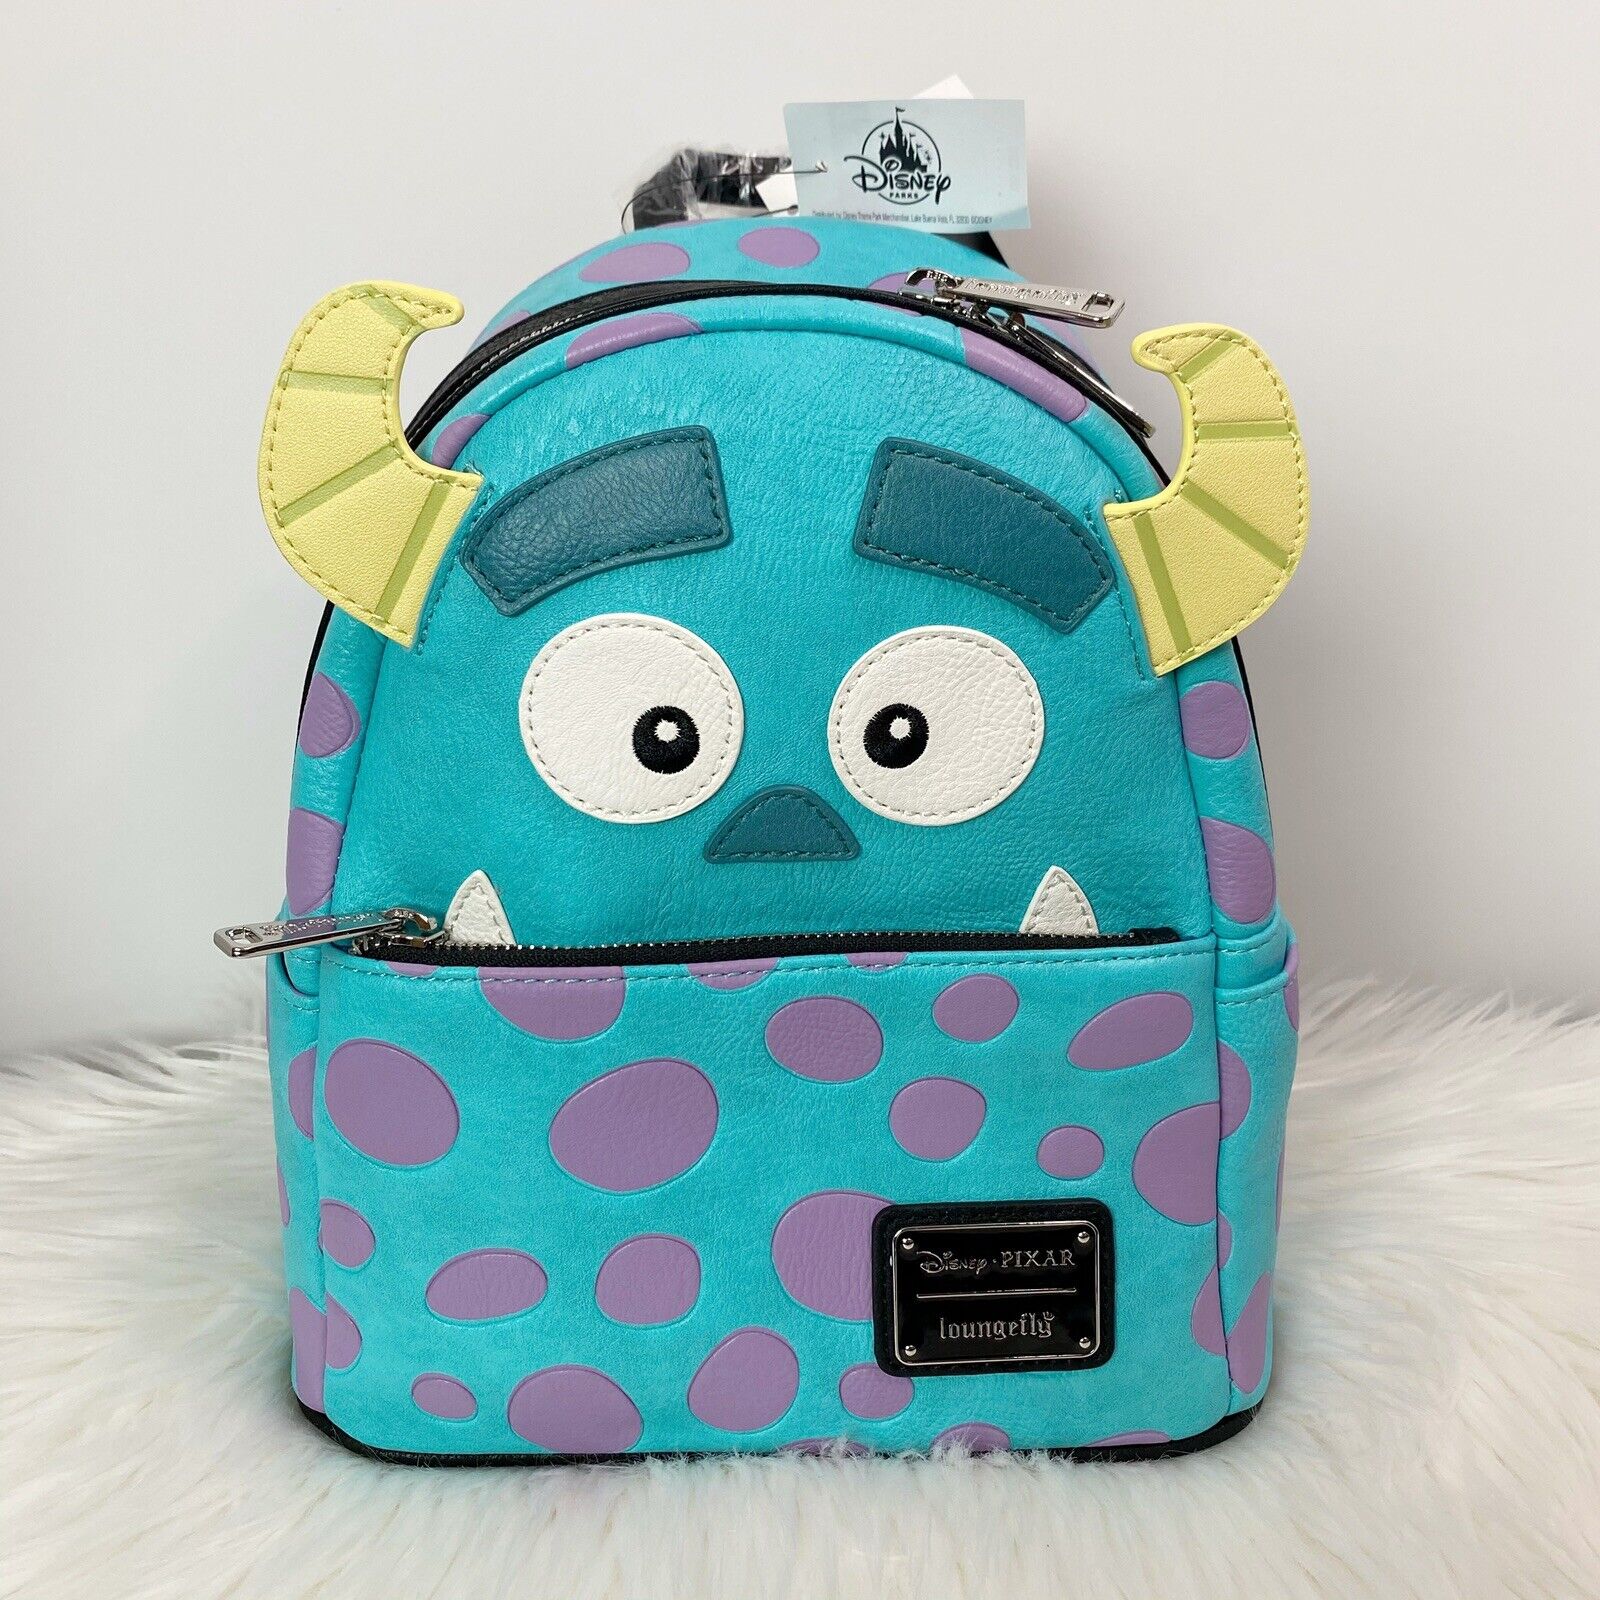 Disney Parks Pixar Monsters Inc Sully Mini Backpack By Loungefly